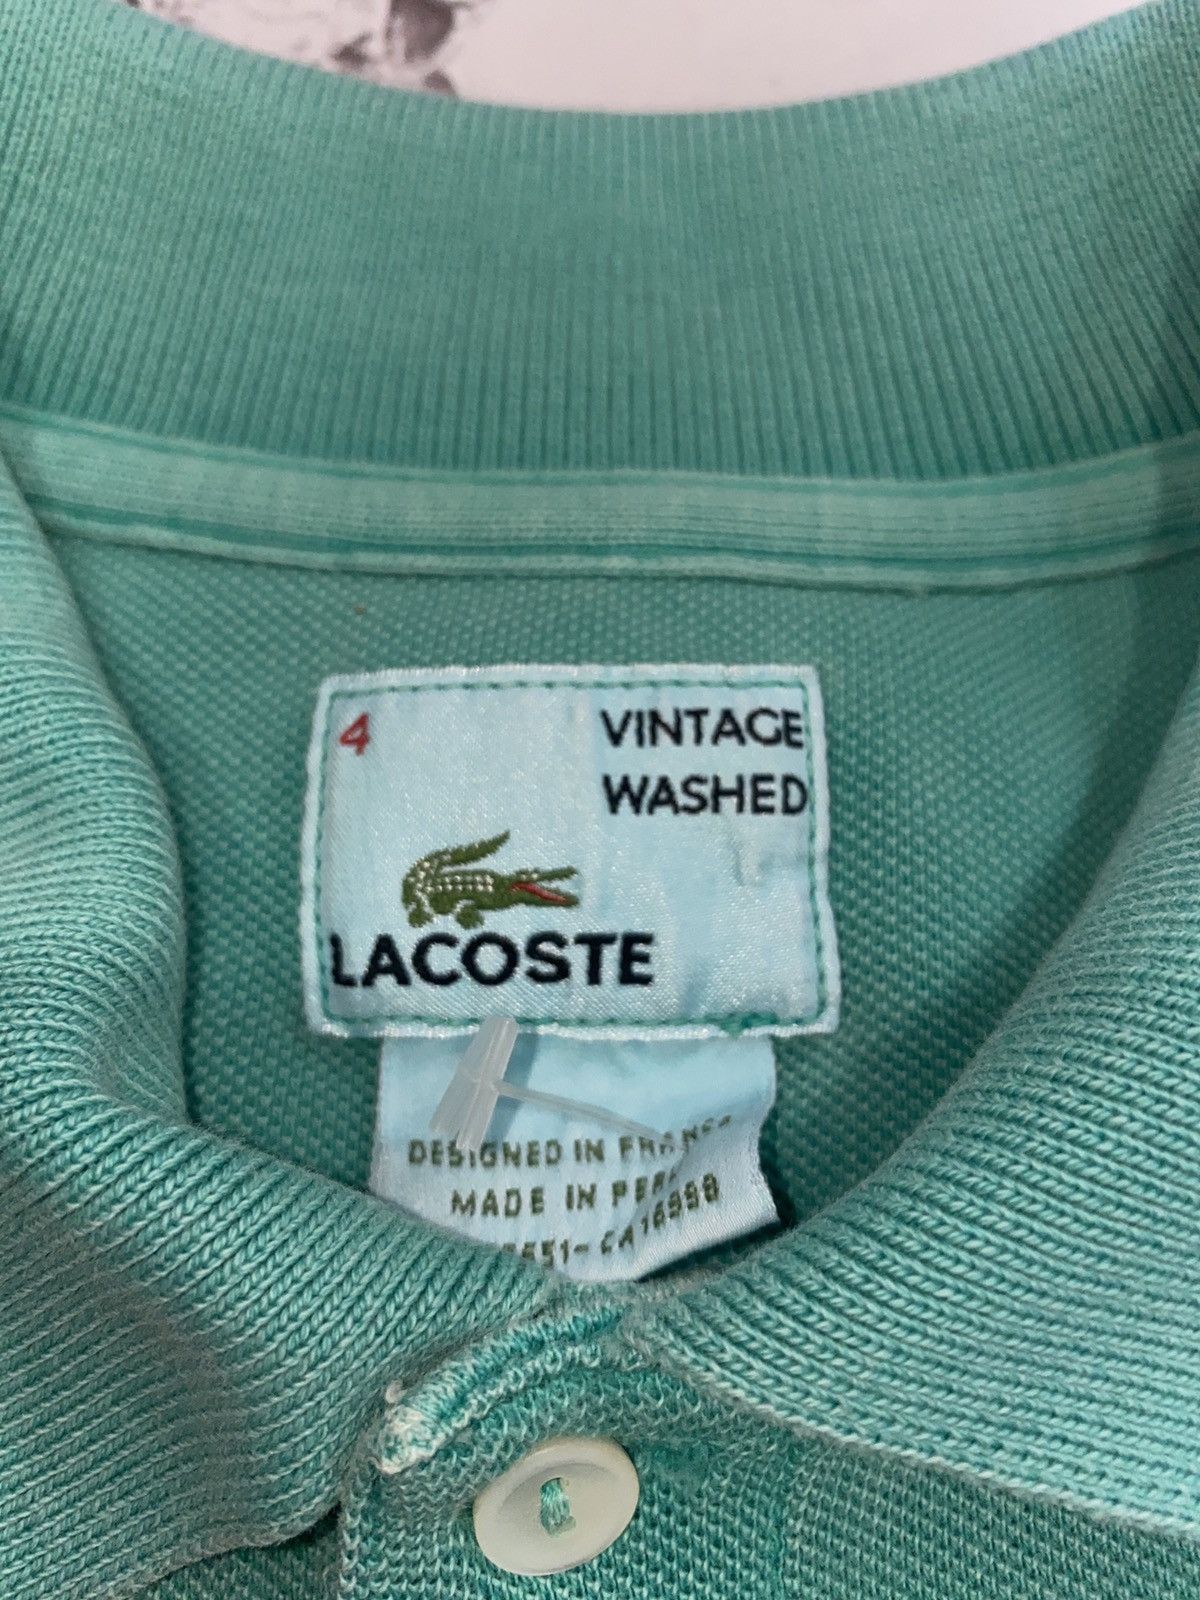 Lacoste Lacoste Vintage Washed Polo Medium Size US M / EU 48-50 / 2 - 4 Preview